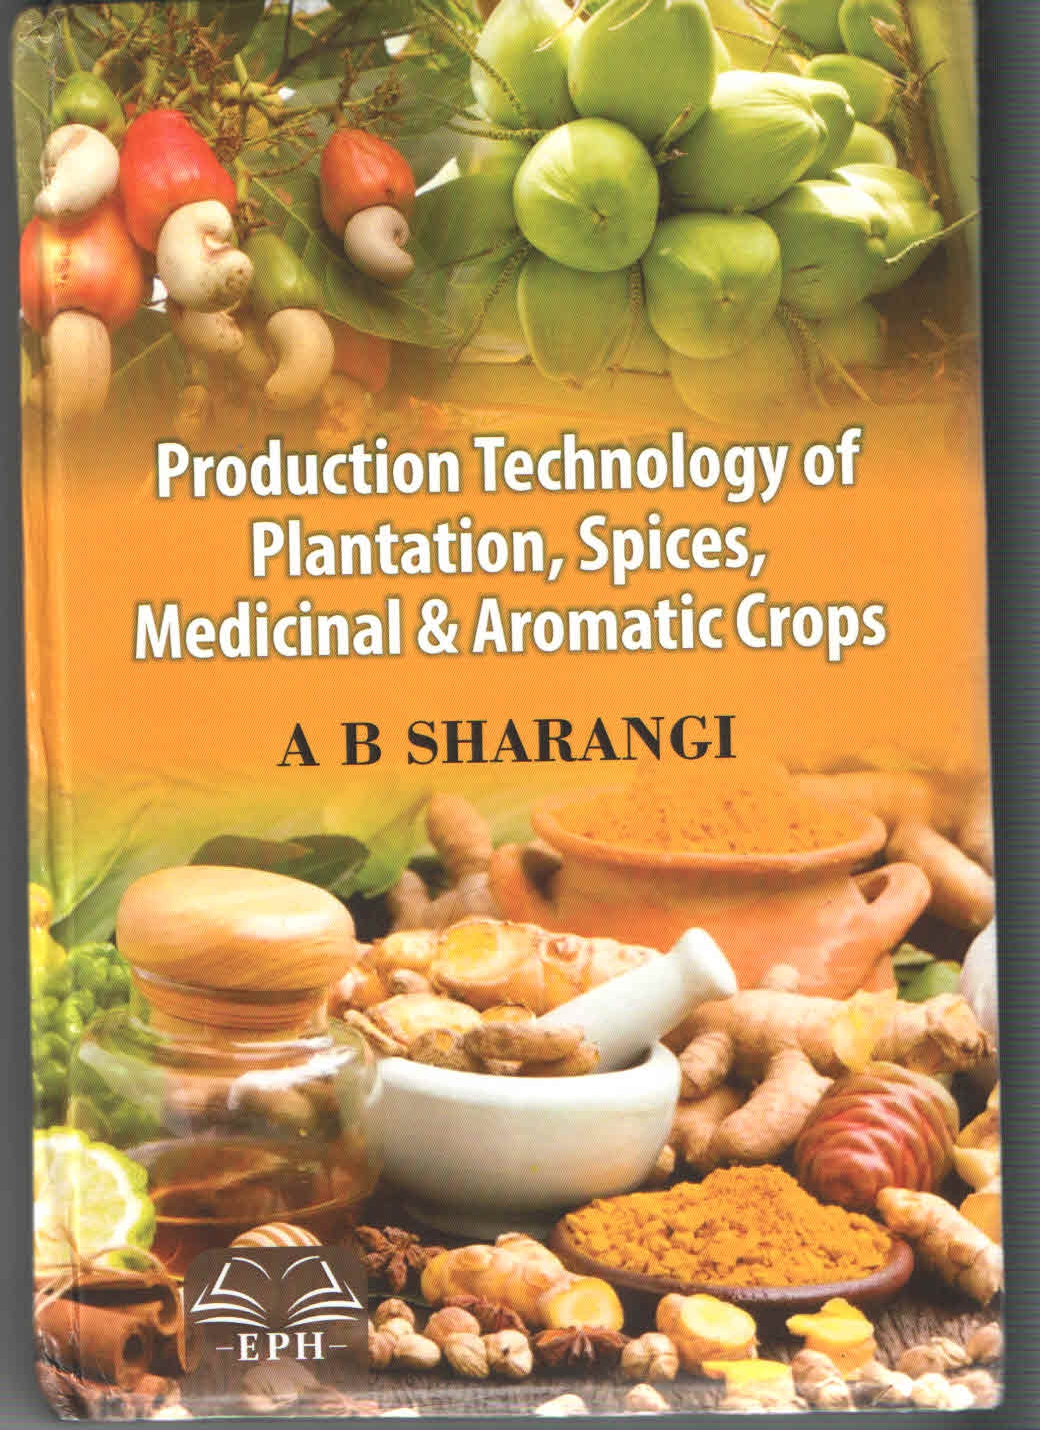 Production Technology of Plantation,Spices,Medicinal & Aromatic Crops